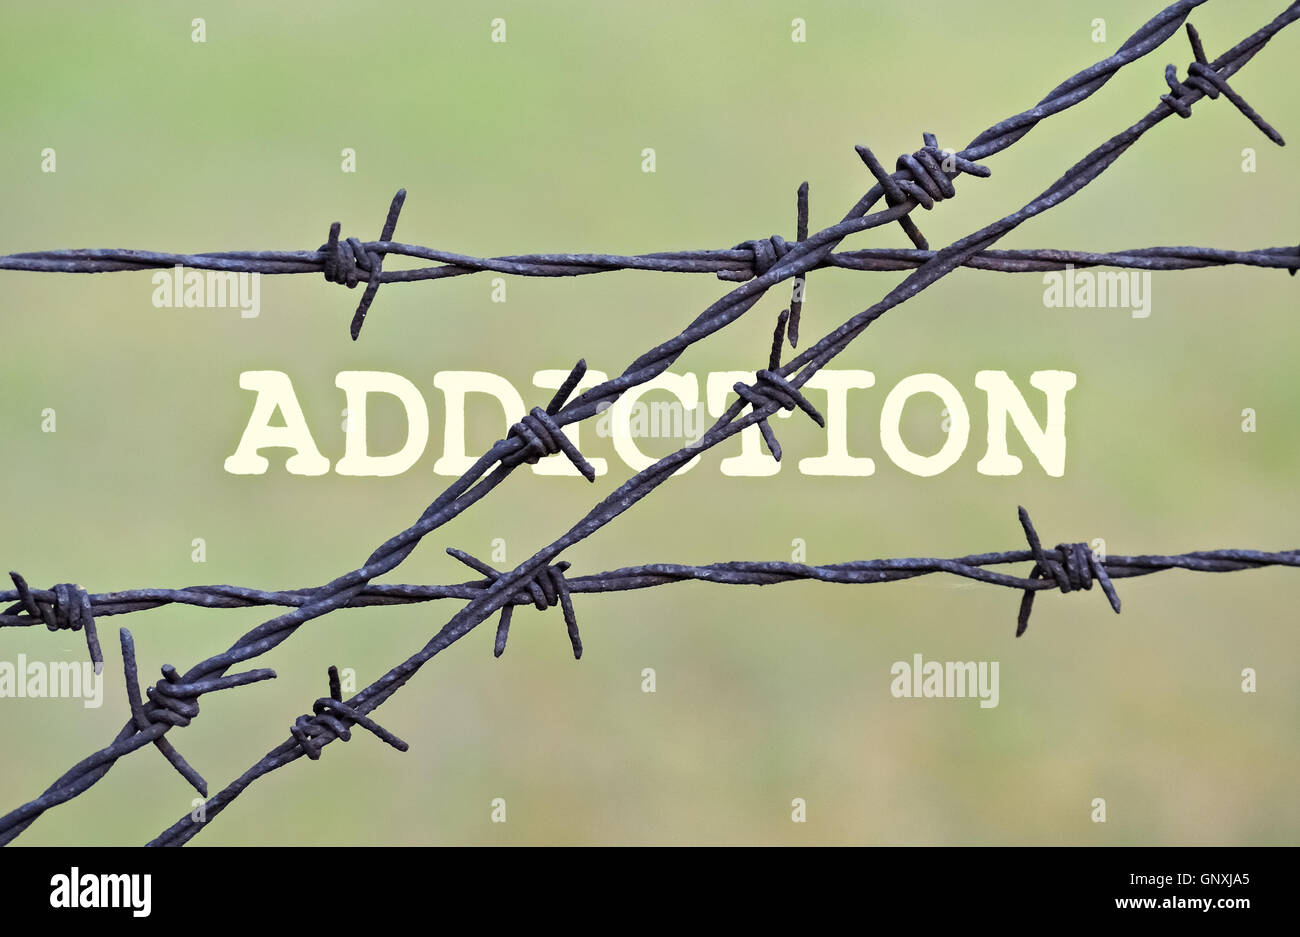 Word Addiction written under a wire fence with barbs Stock Photo